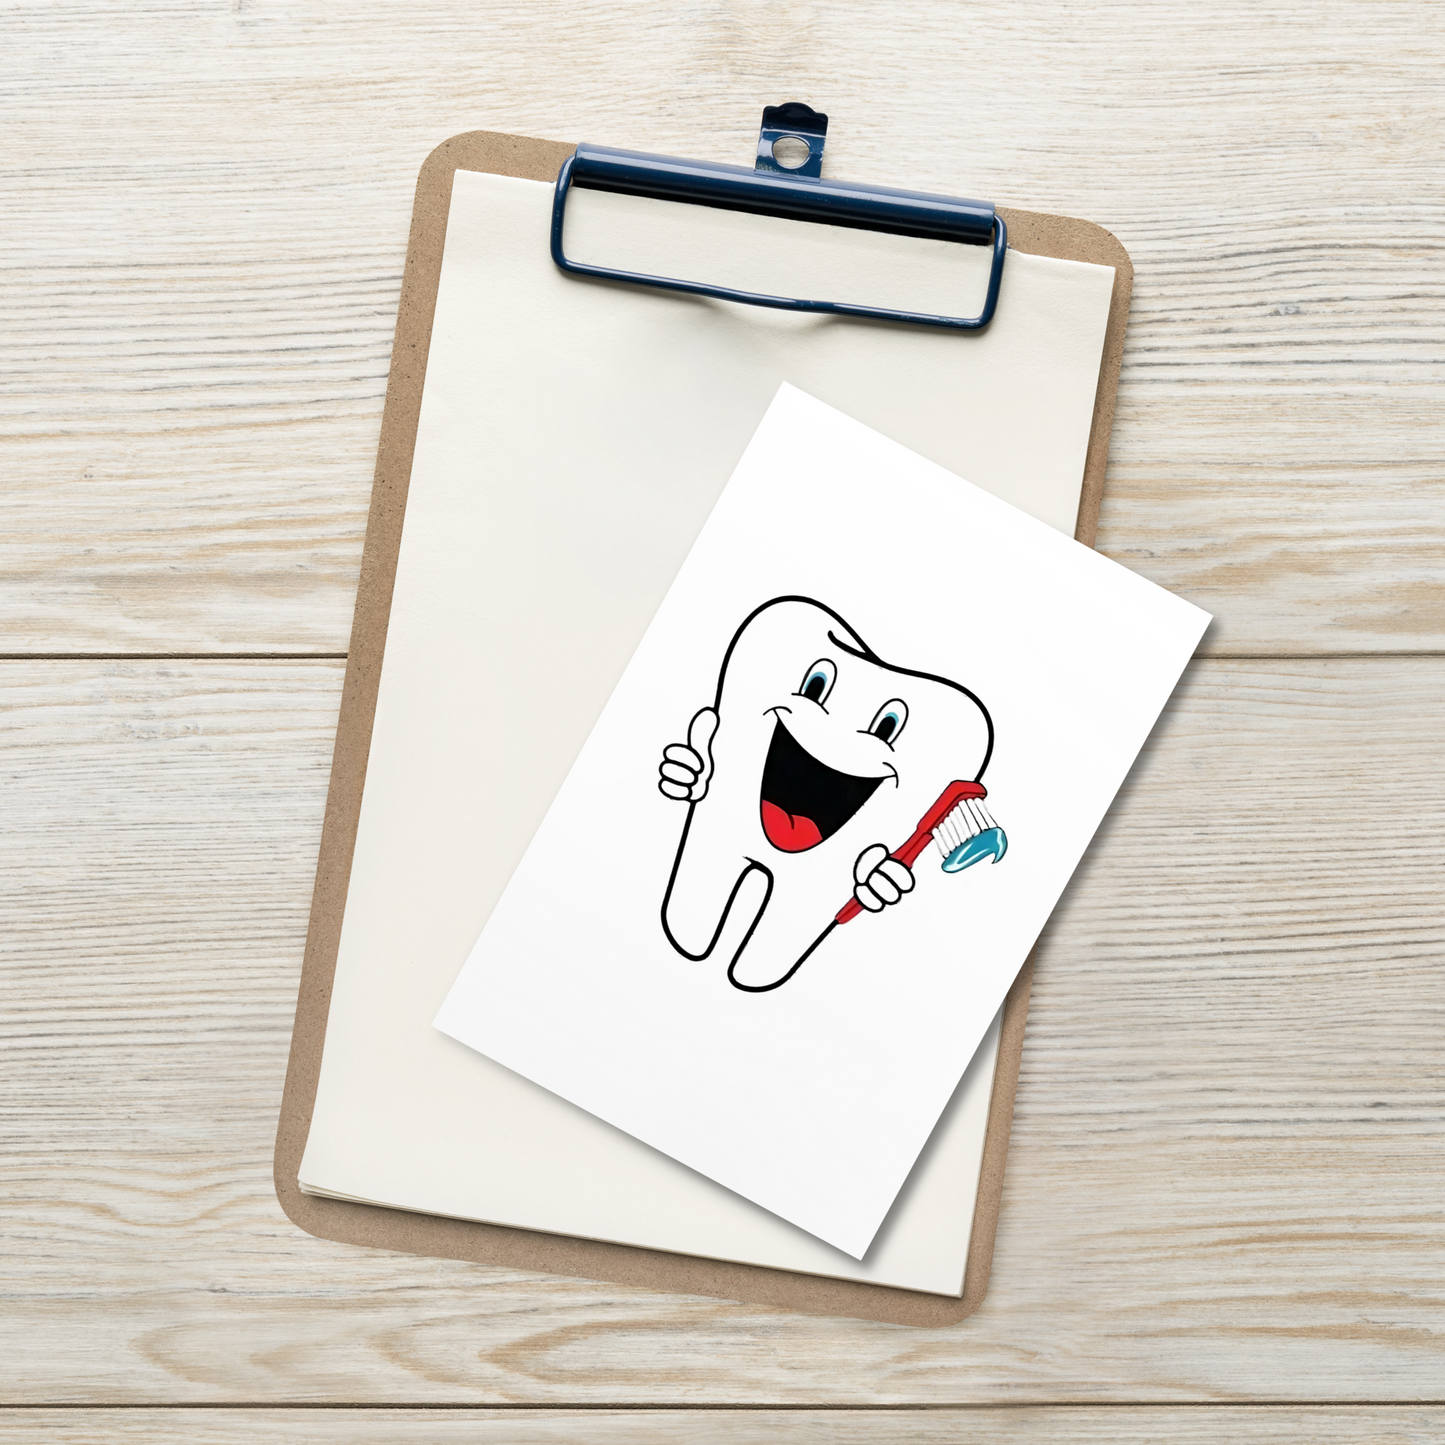 Dental Motivational & Reward Cards- Smiling Tooth Holding A Red Toothbrush (White Background)